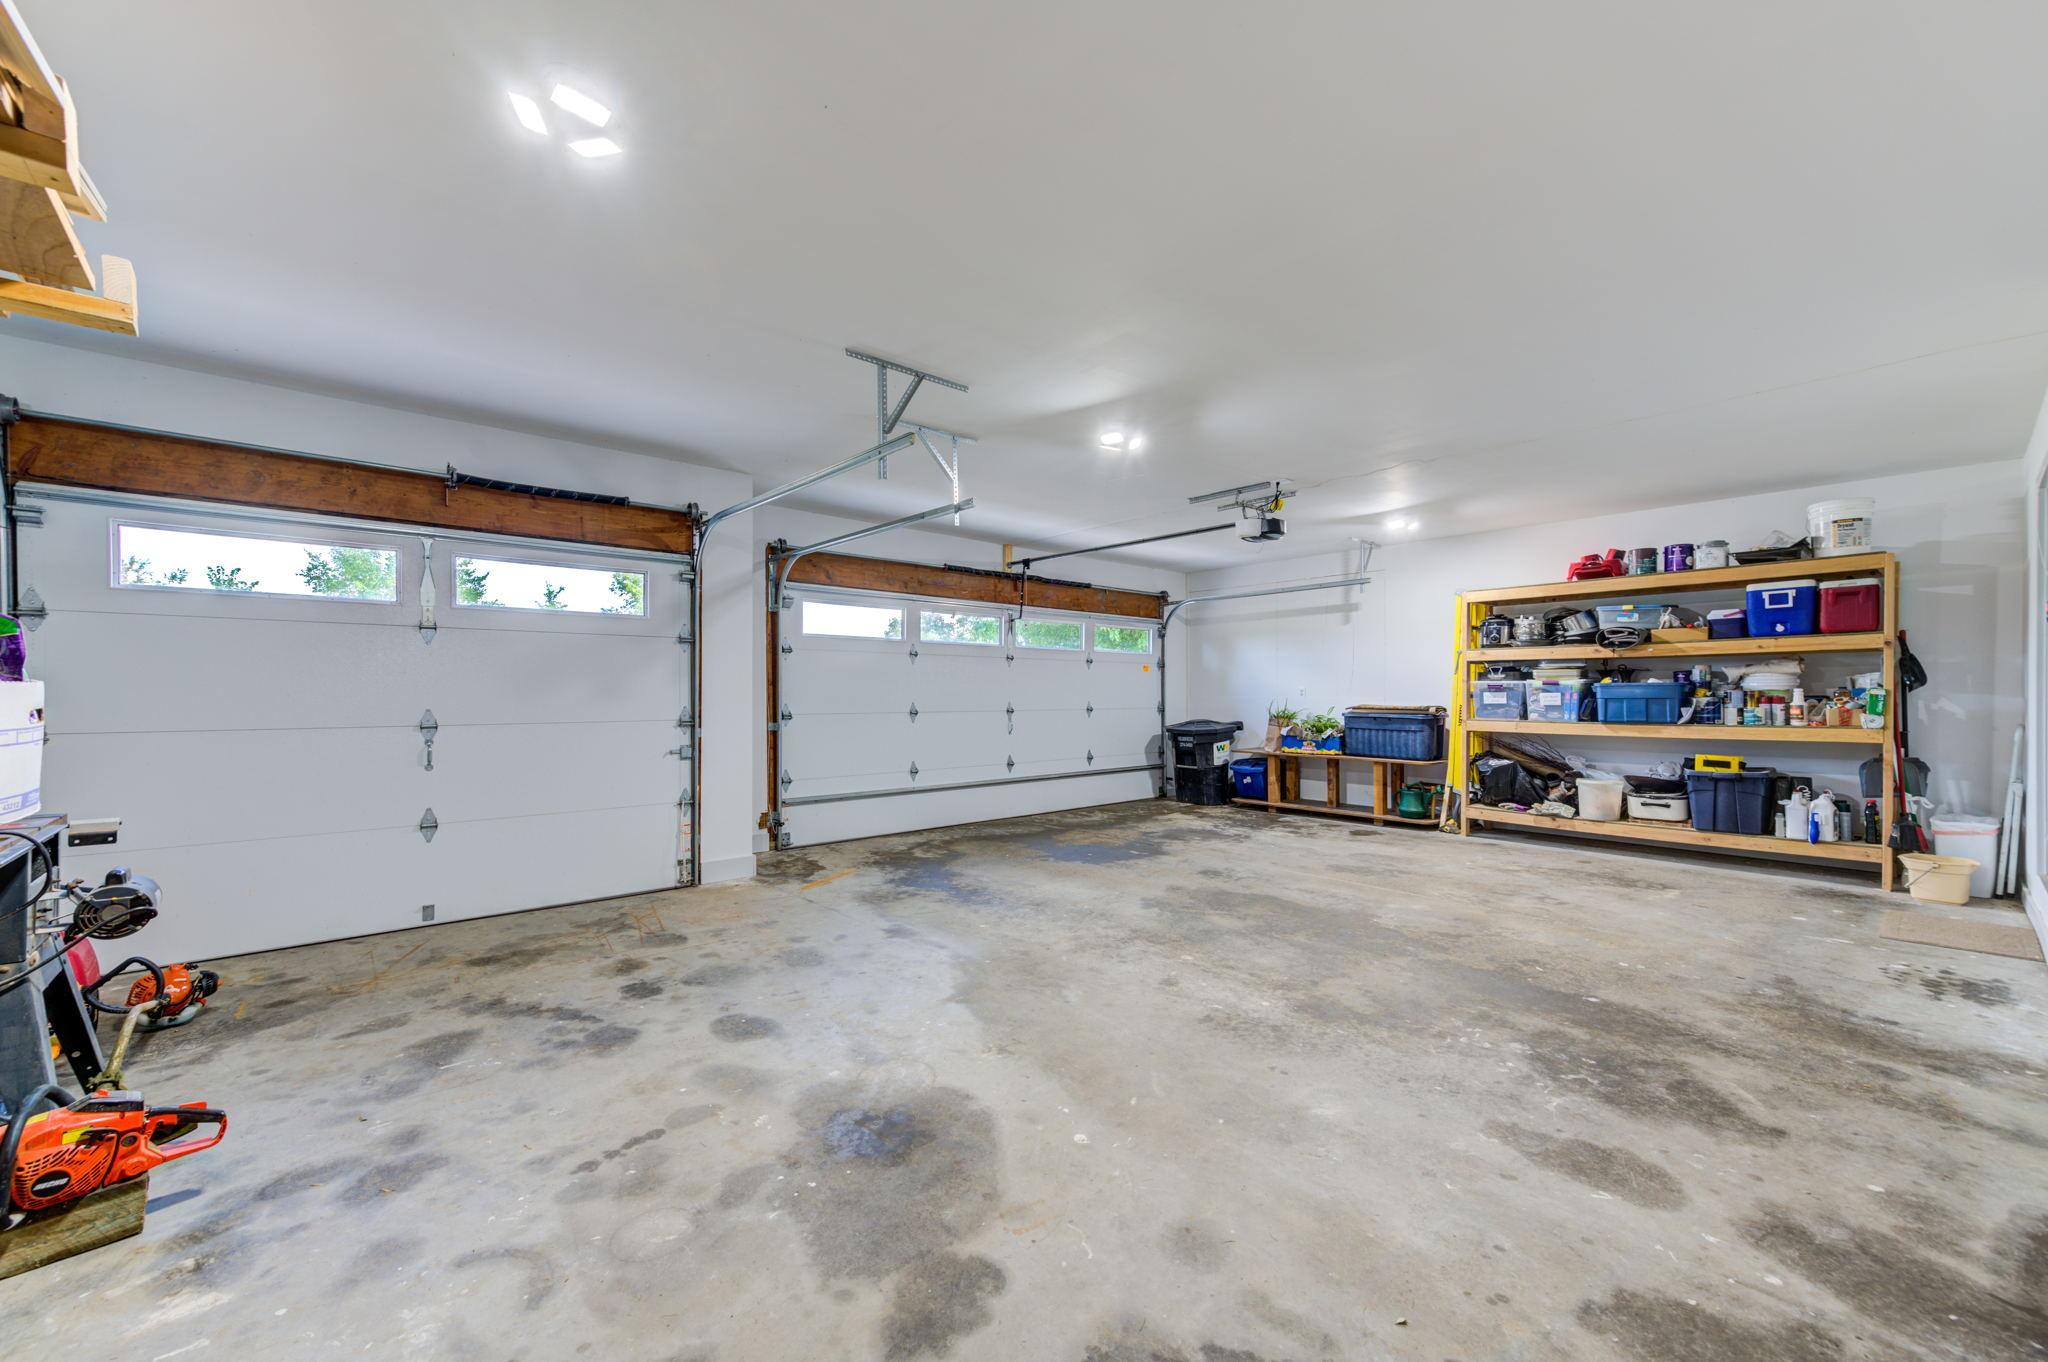 The large three stall attached garage is insulated and finished offering plenty of storage space for vehicles, tools and toys while at the lake!